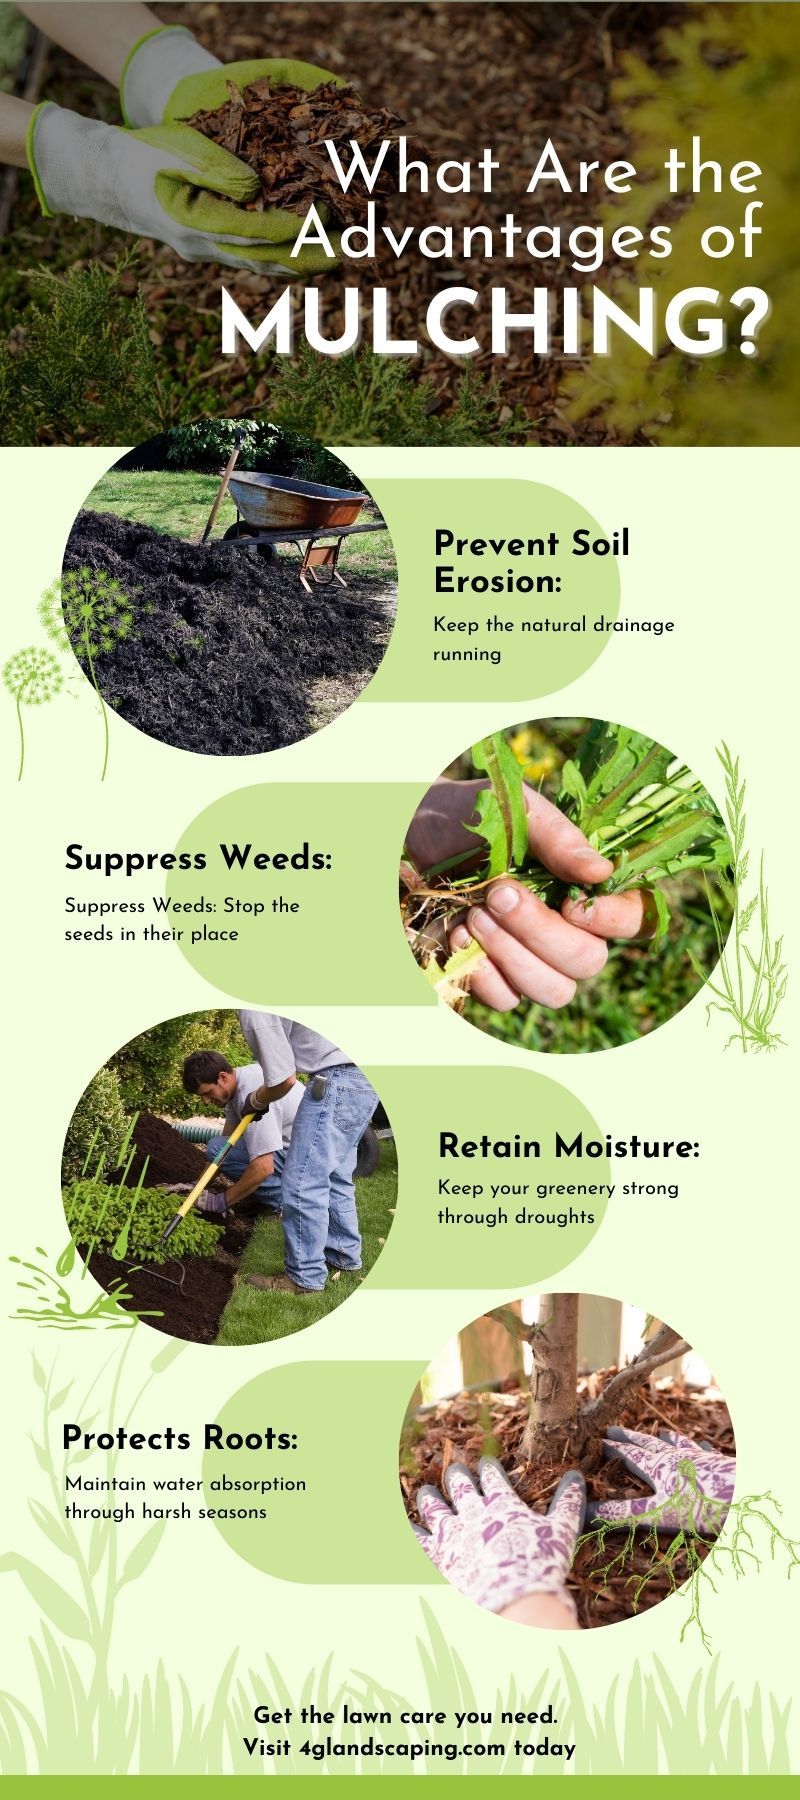 What Are the Advantages of Mulching.jpg